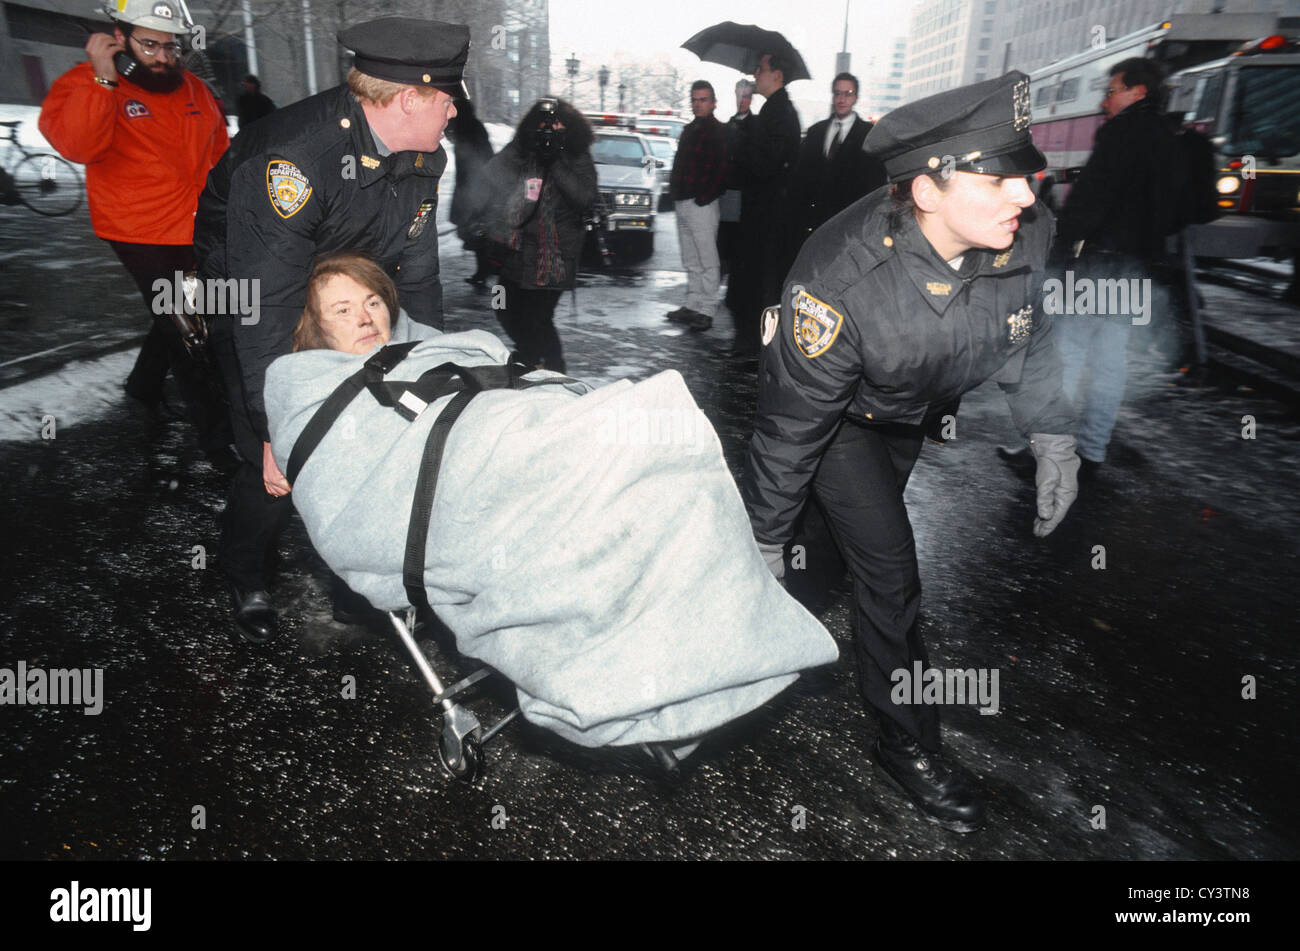 New York, NY - 26 February 1993 - First Responders evacuate workers, through snow and falling ice, after the 1993 bombing of the World Trade Center Stock Photo